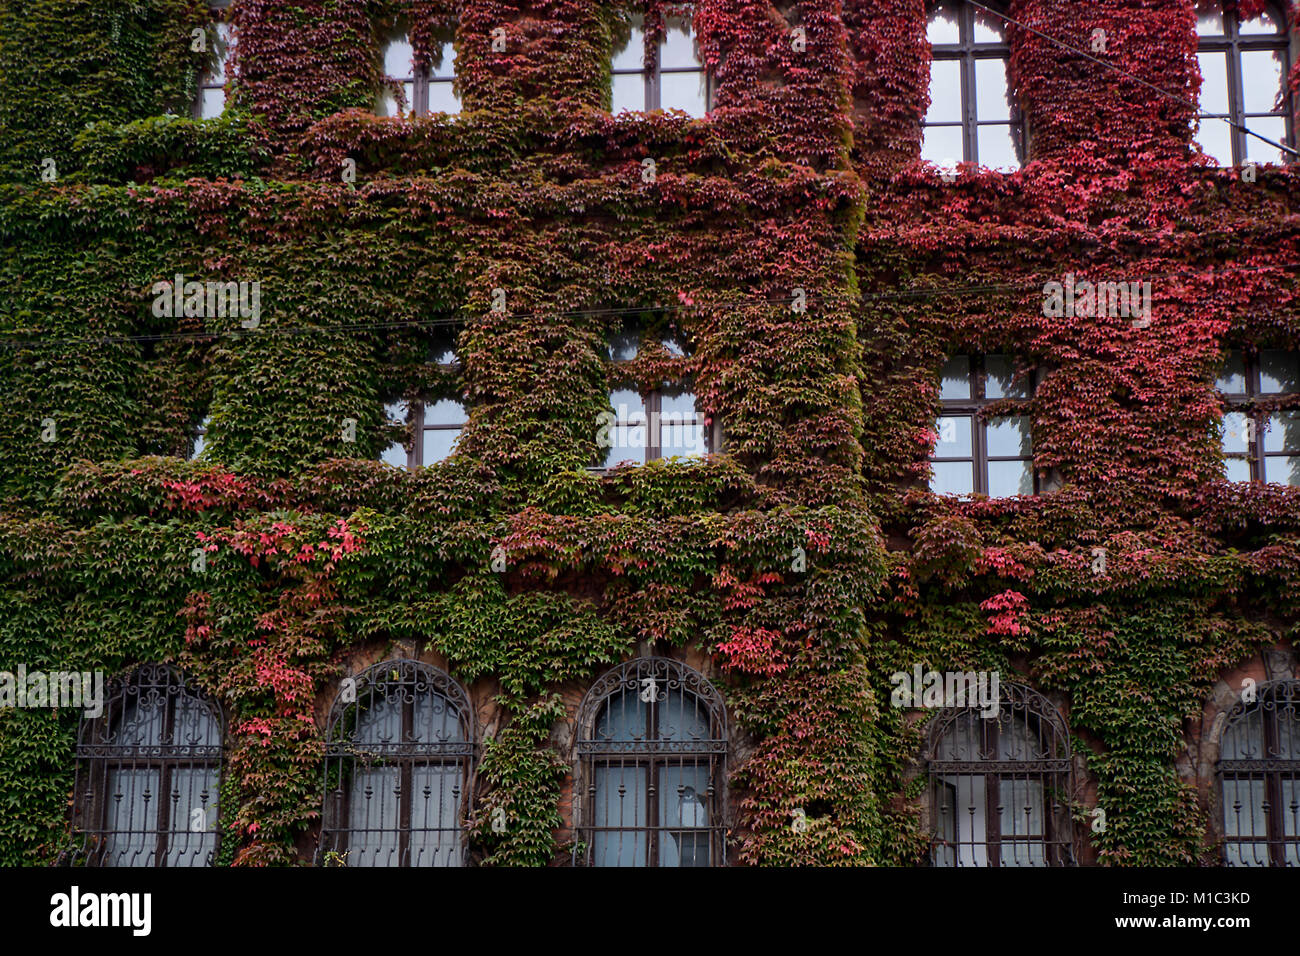 Building of The National Museum in Wroclaw Poland, covered in gorgeous ivy, designed by an architect Karl Friedrich Endell and erected in 1883 - 1886. Stock Photo